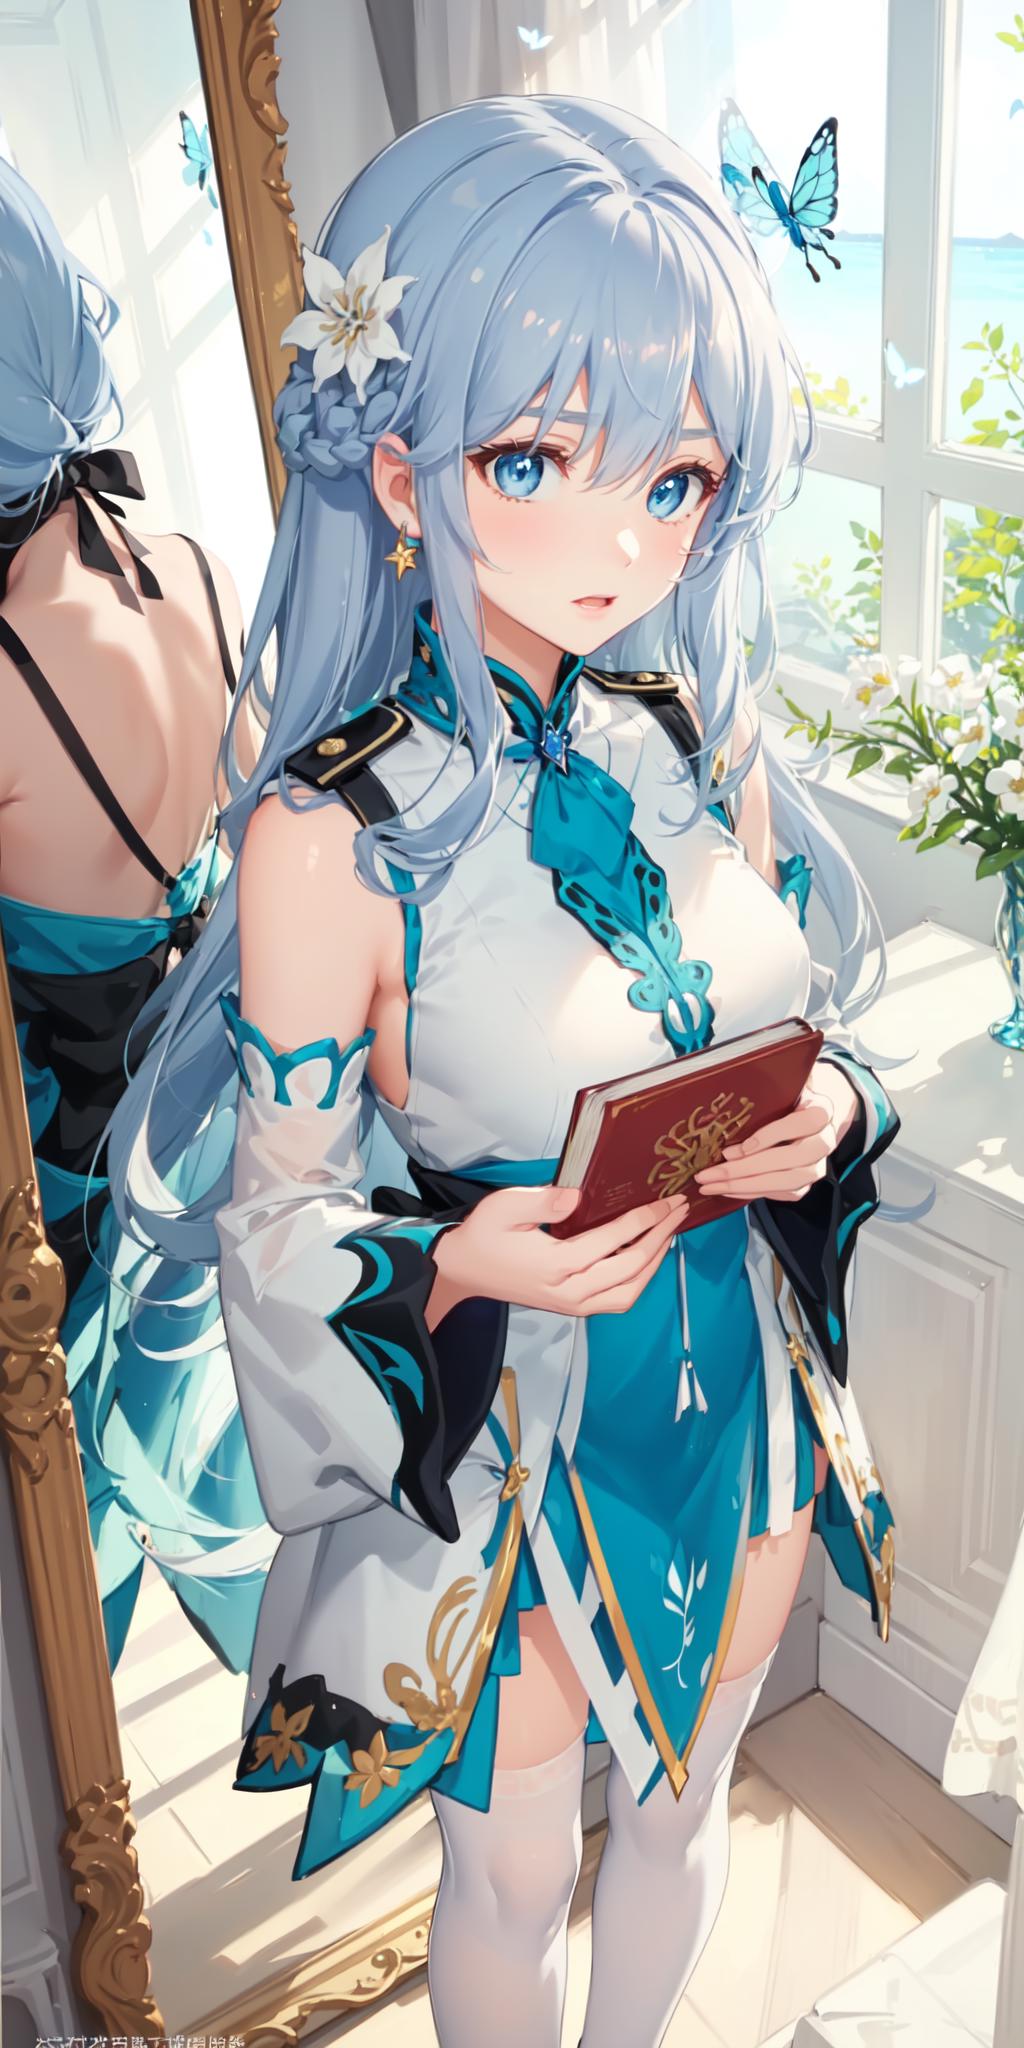 A blue and white anime illustration of a woman in a dress holding an open book.